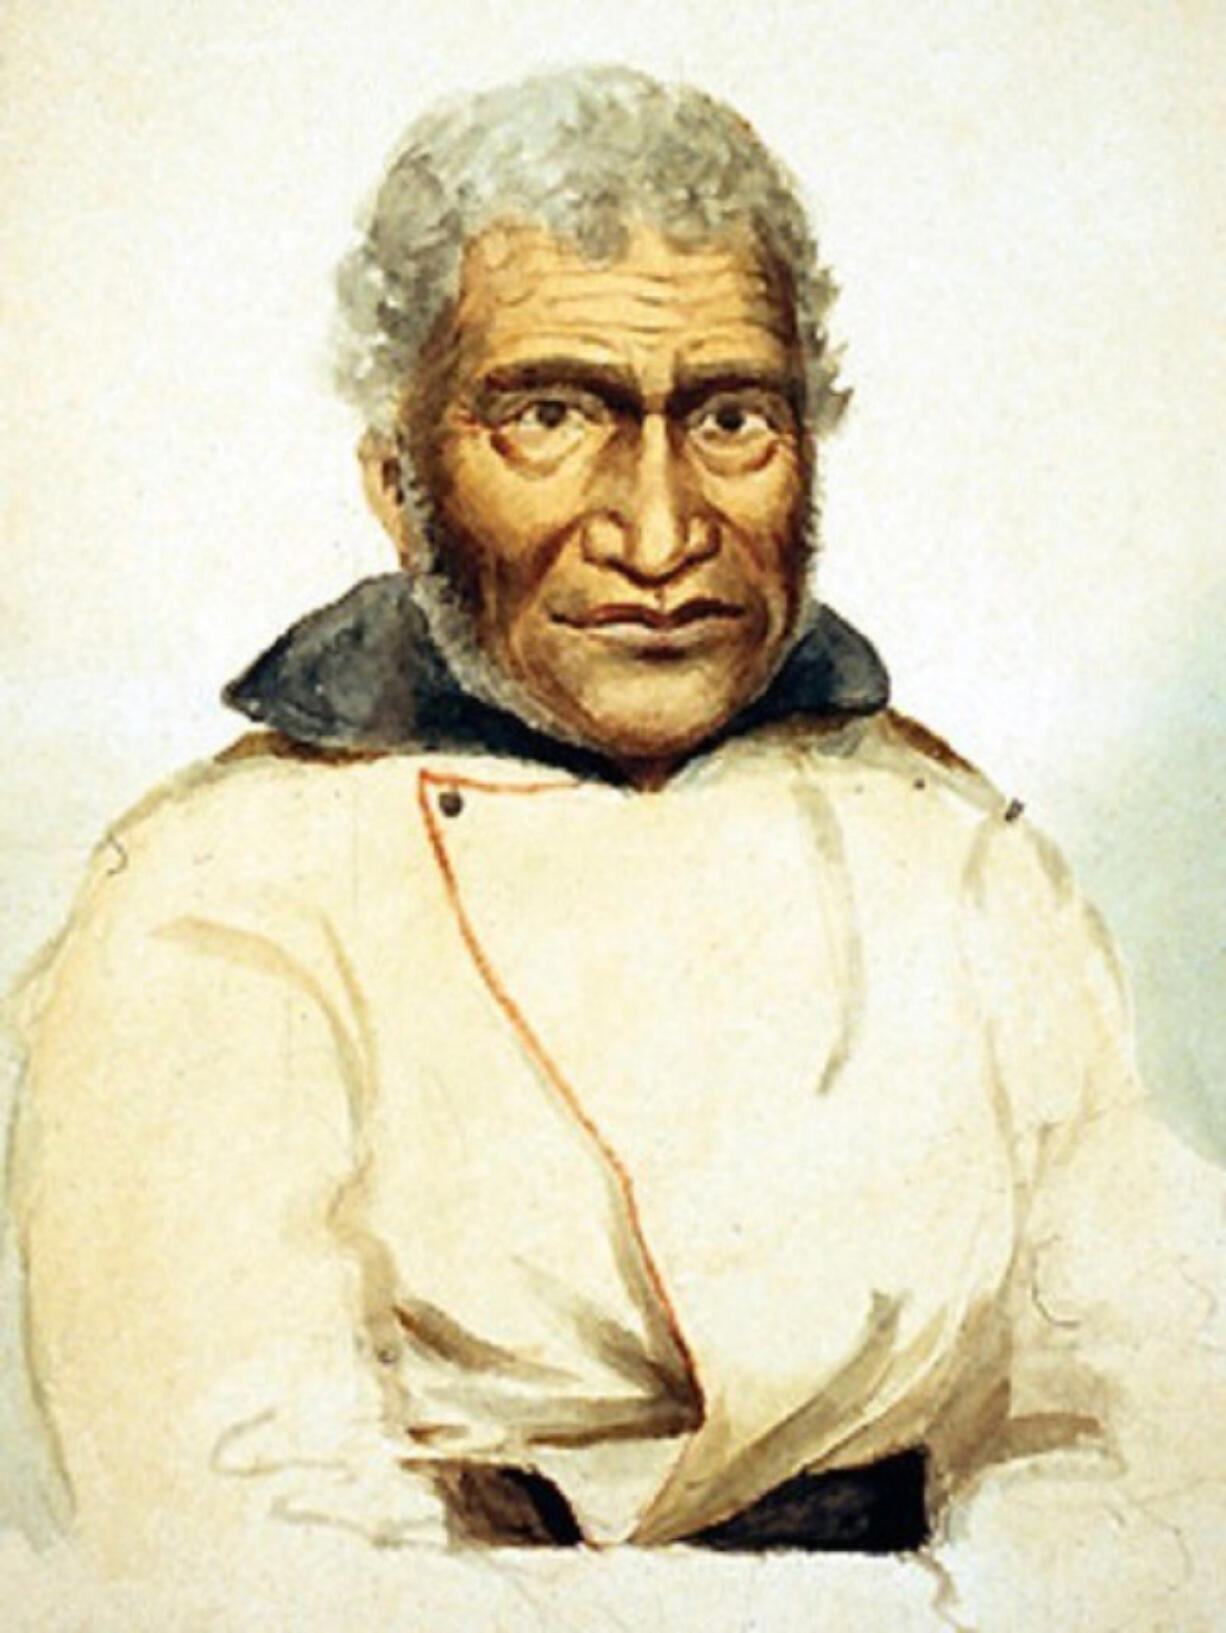 In 1847, traveling artist Paul Kane stopped at Fort Vancouver, where he painted a portrait of Naukane (John Cox or Coxe), a member of Hawaiian royalty. Fur trading companies contracted with Hawaiians for many jobs. Cox, a retired Hudson's Bay Company employee, died at Fort Vancouver in 1850. At one time, the plain south of the fort was called Cox Plain.